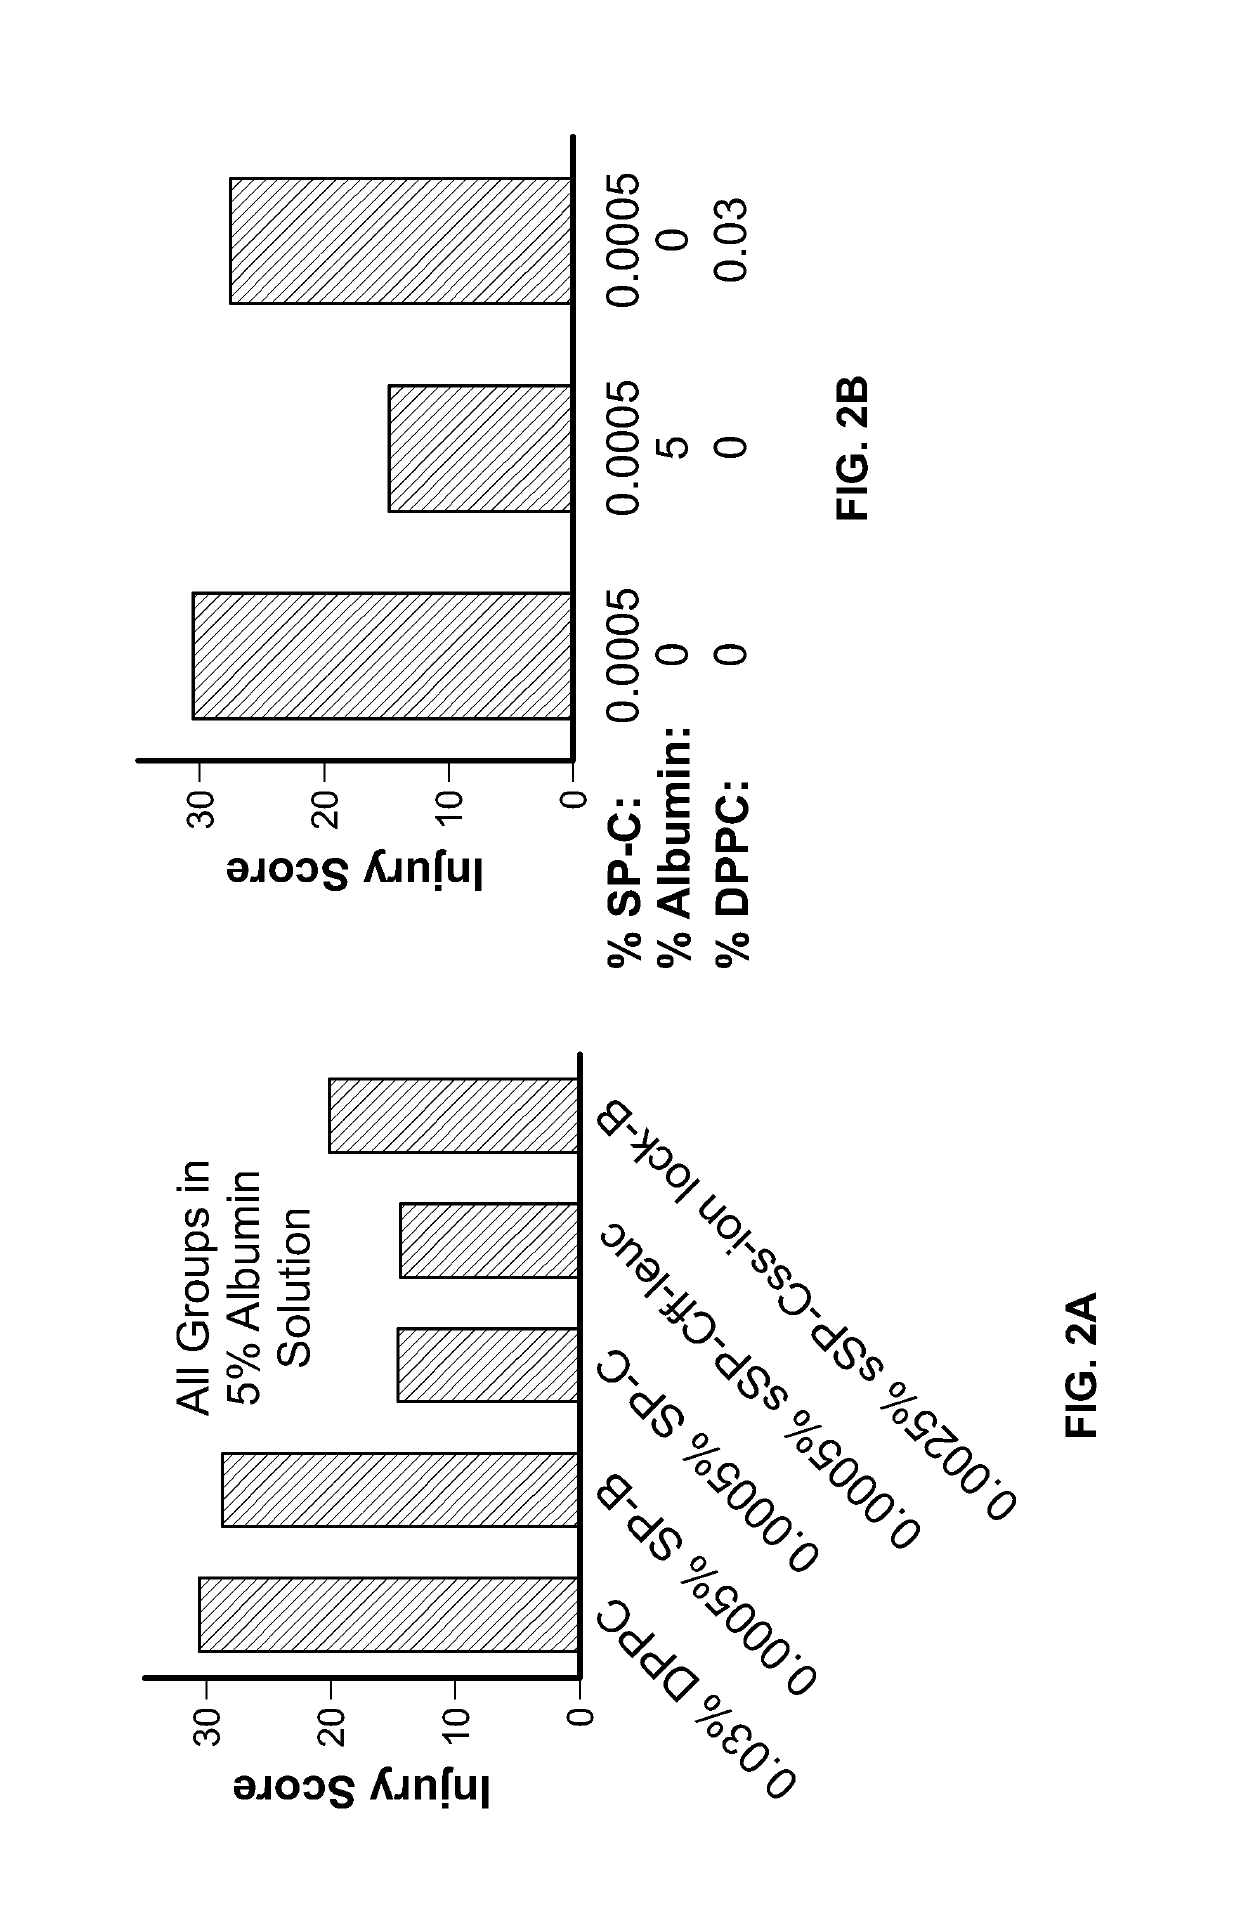 Dilute surfactant or isolated surfactant protein solution for the reduction of surface tension in the lung